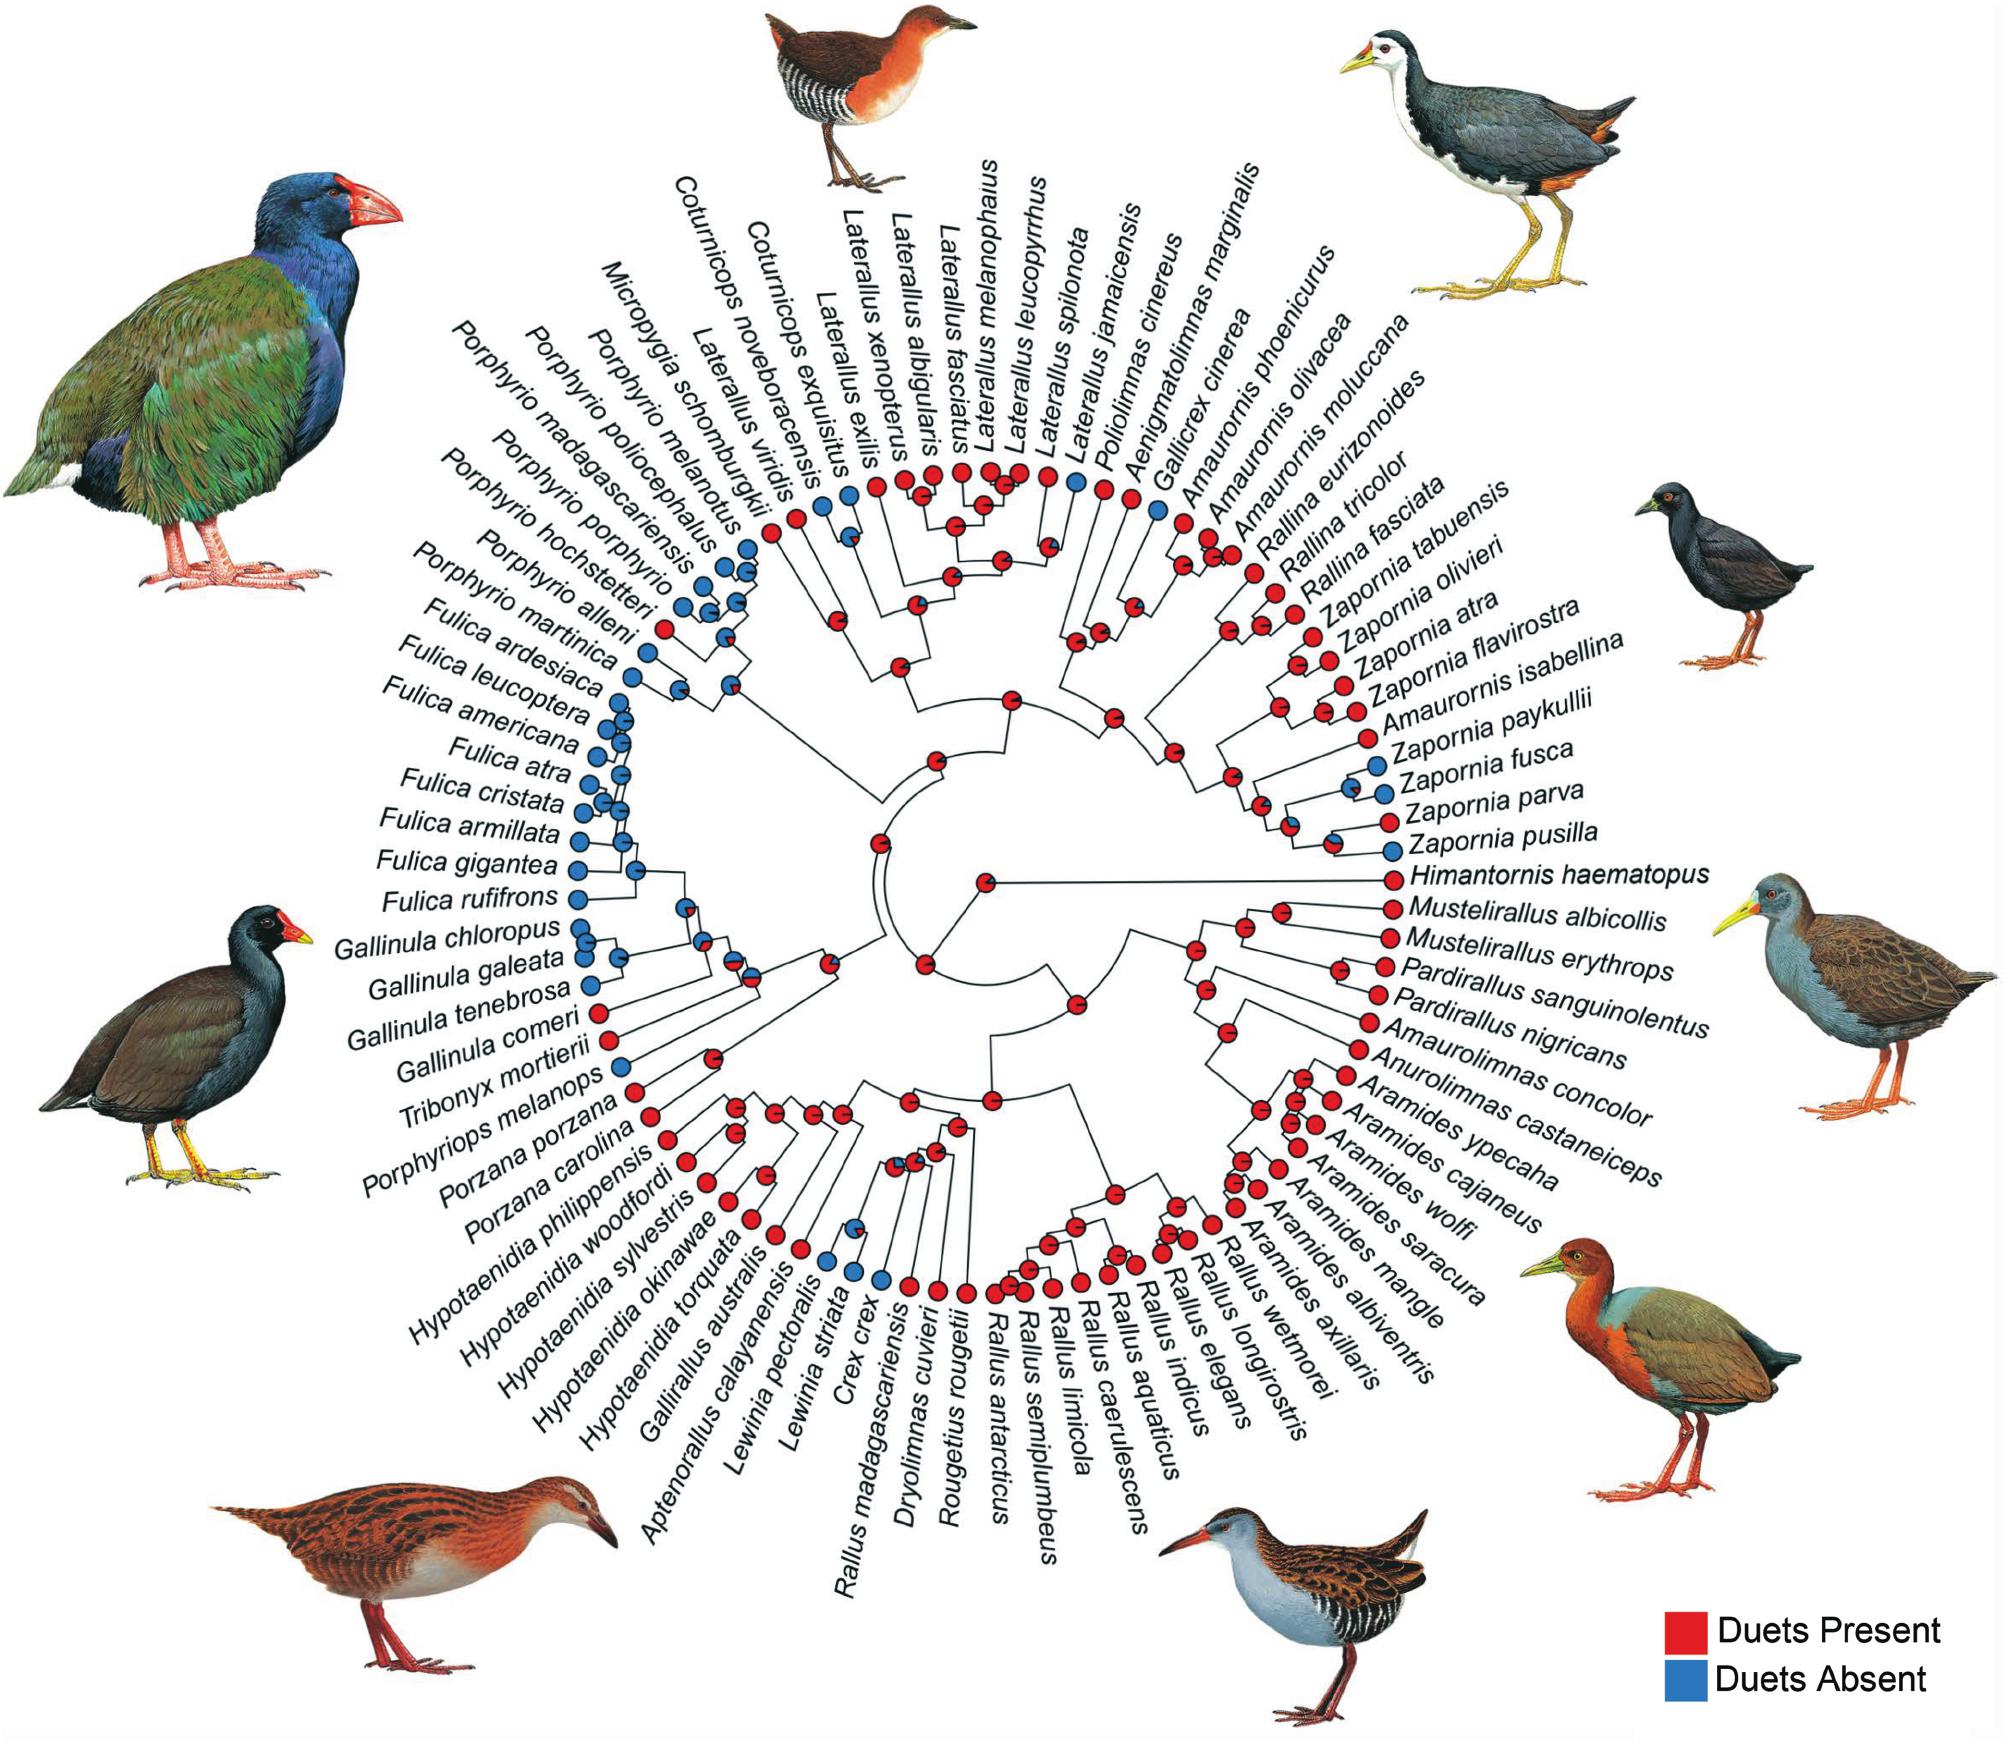 A rallid ballad Communal signaling is correlated with year-round territoriality in the most duet-rich family of birds (Gruiformes Rallidae)